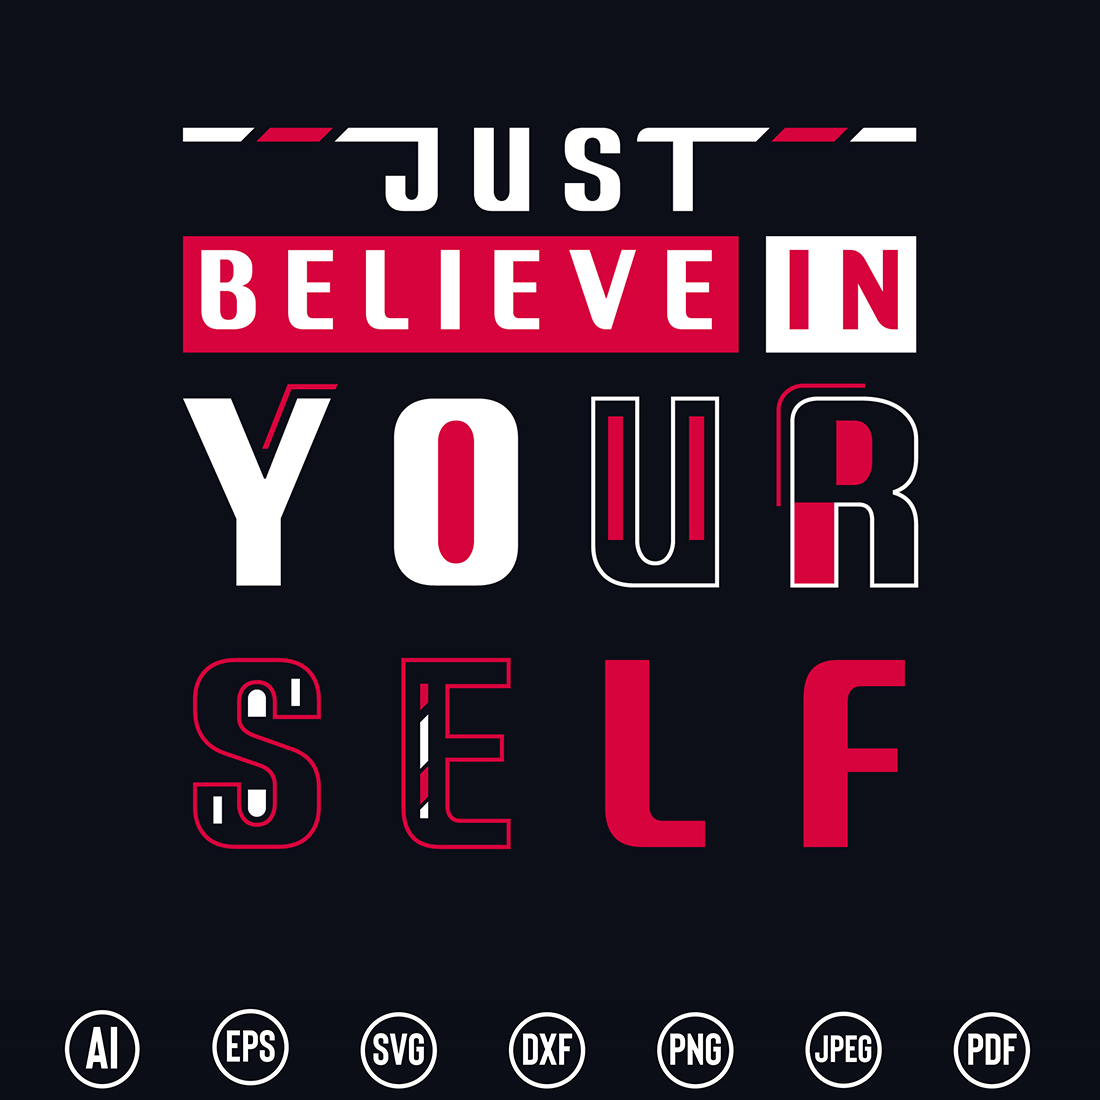 Motivational & Modern Typography T-Shirt design with “Just Believe in your self” quote for t-shirt, posters, stickers, mug prints, banners, gift cards, labels etc preview image.